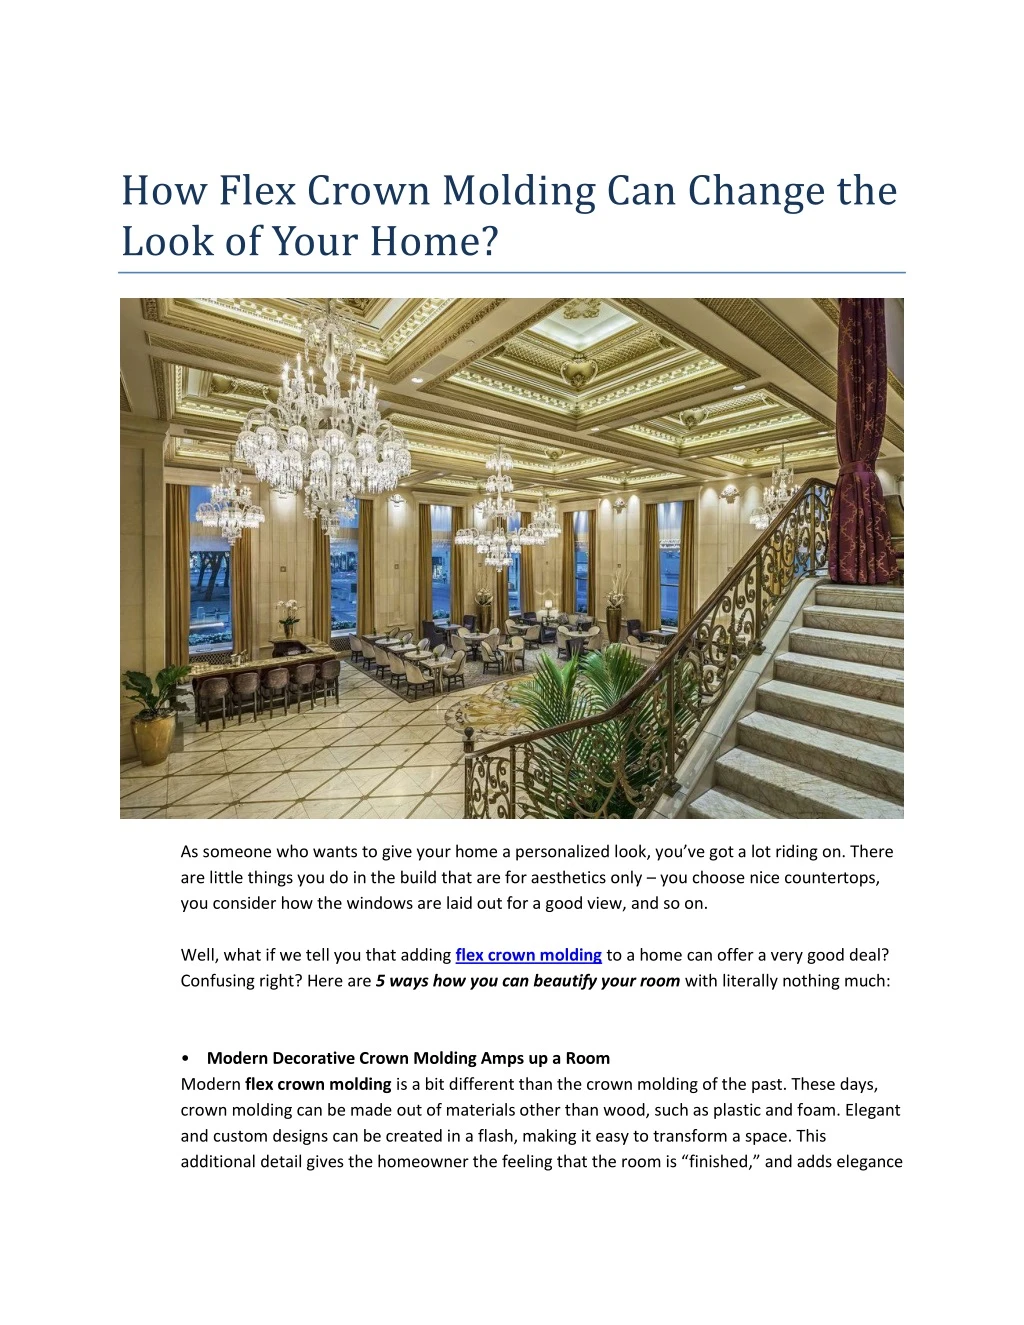 how flex crown molding can change the look